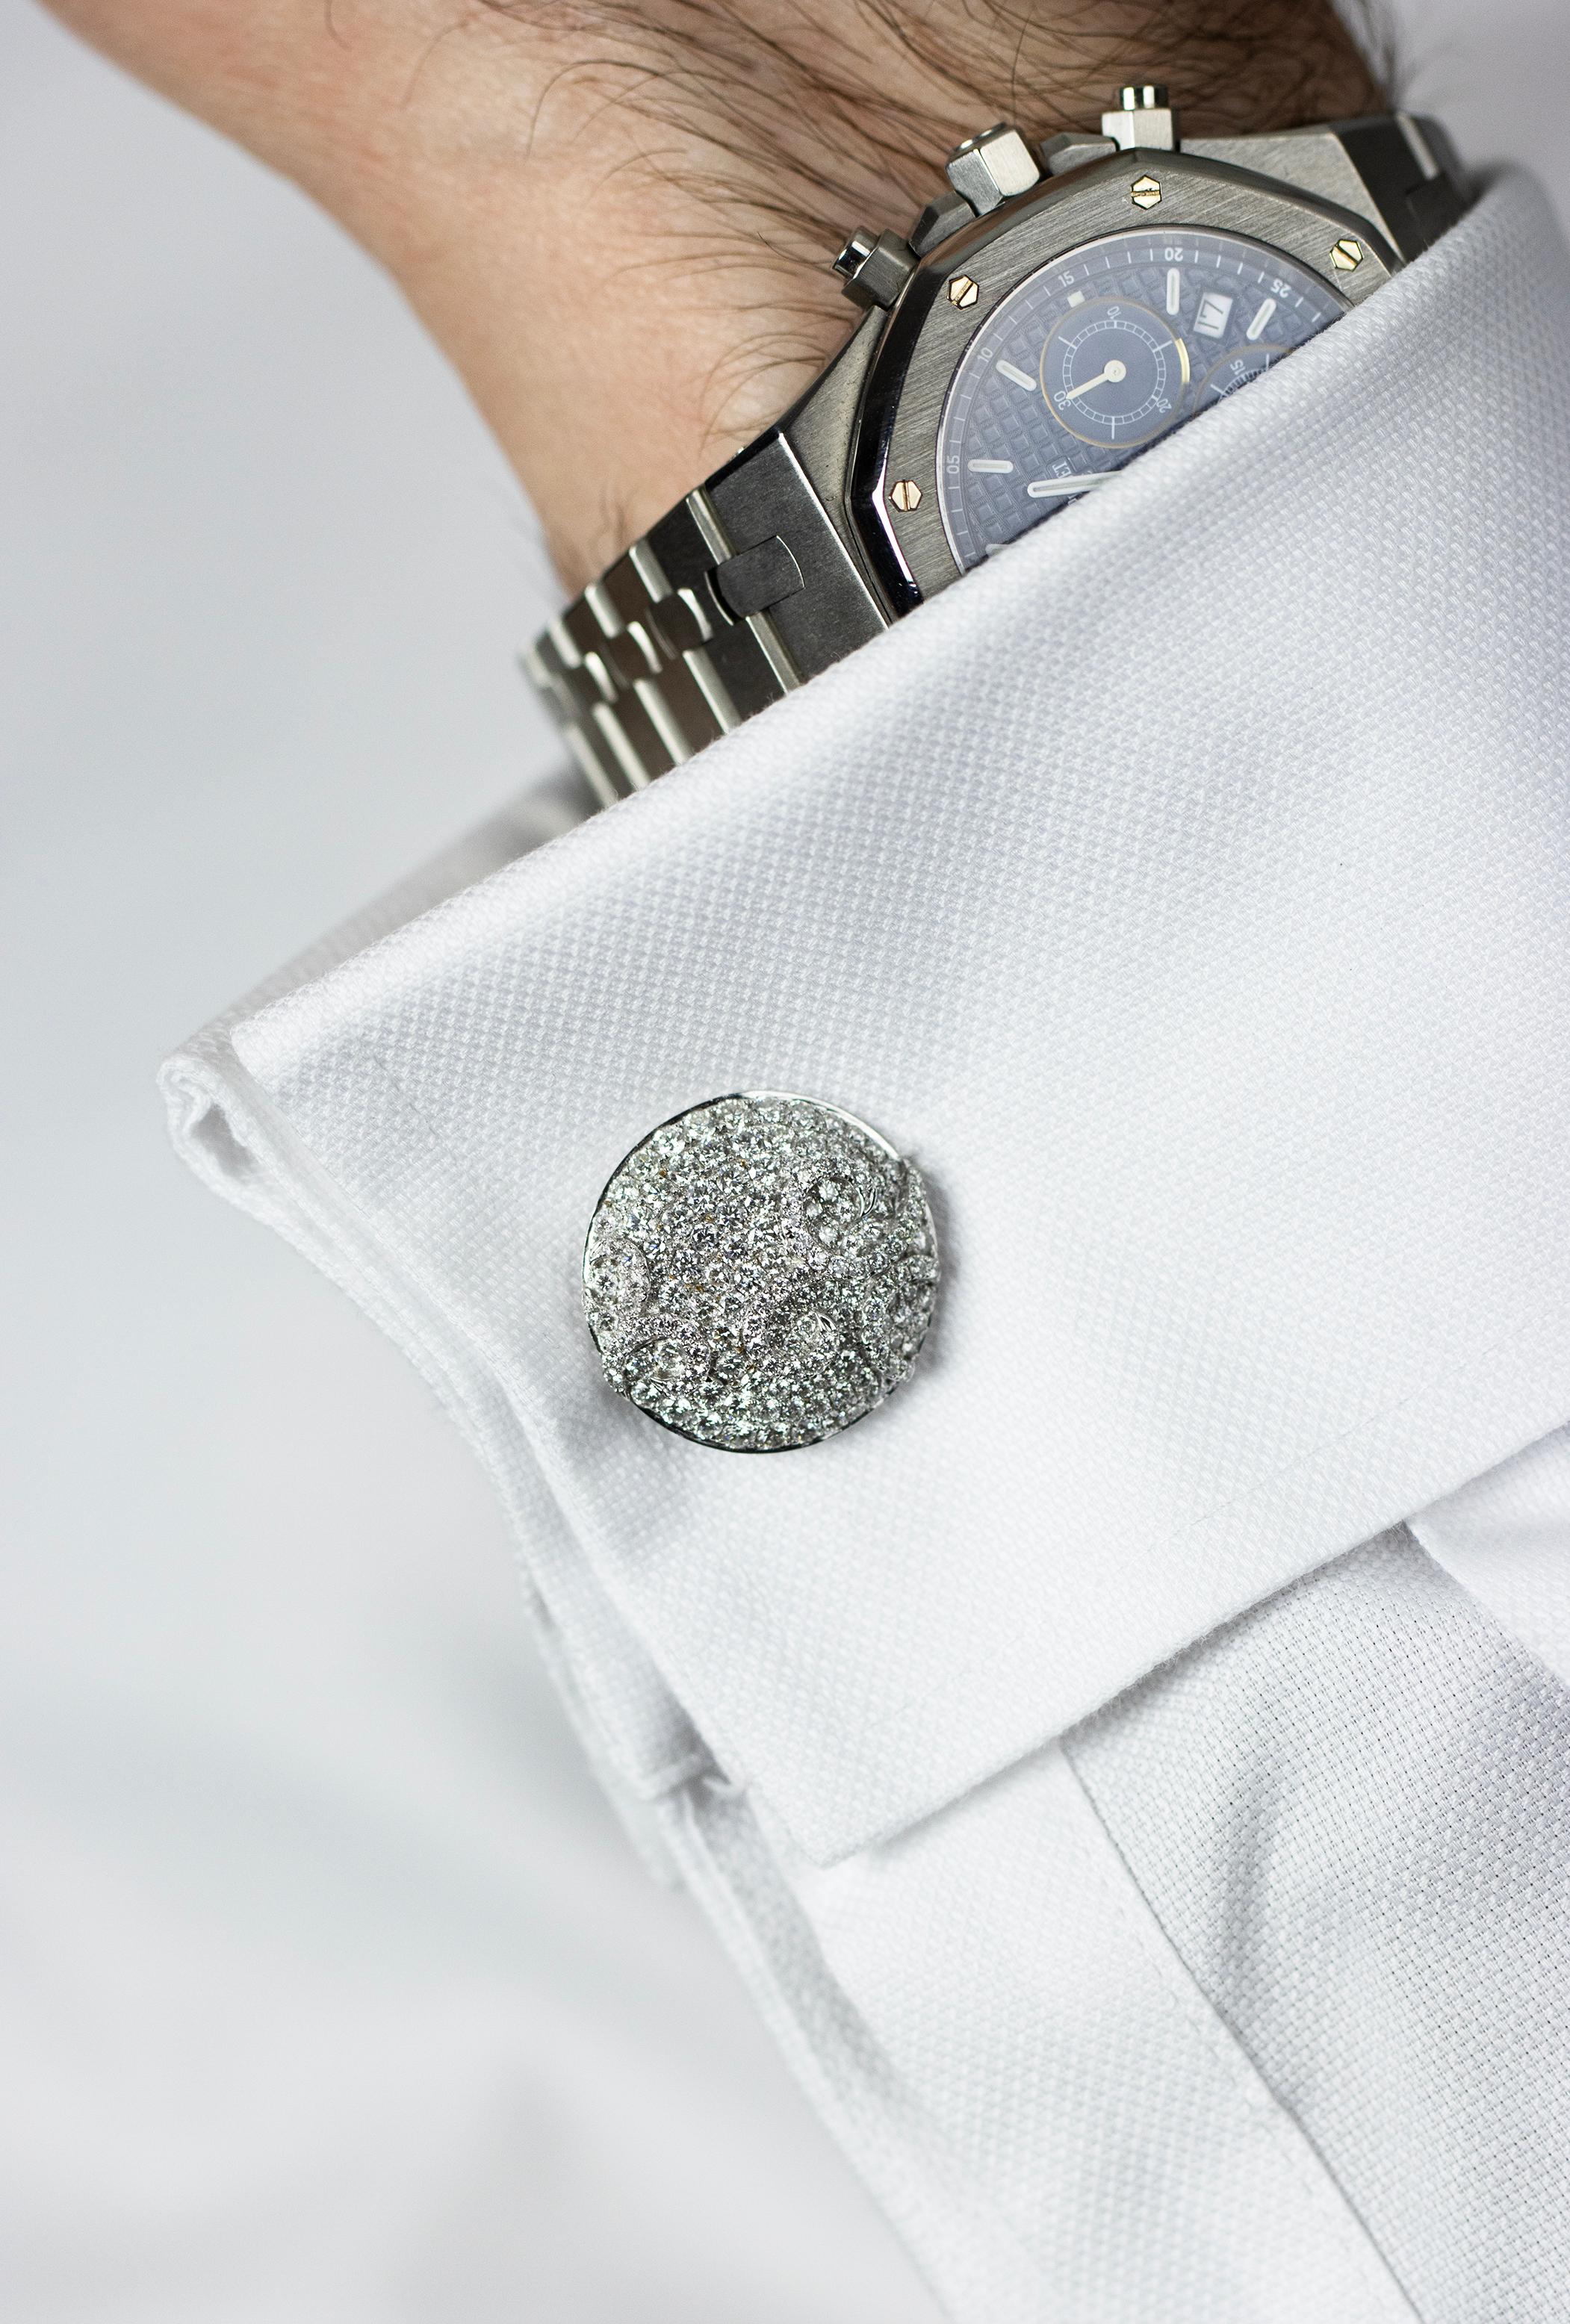 5.20 Carats Total Brilliant Round Diamond 18k White Gold Cufflinks In New Condition For Sale In New York, NY